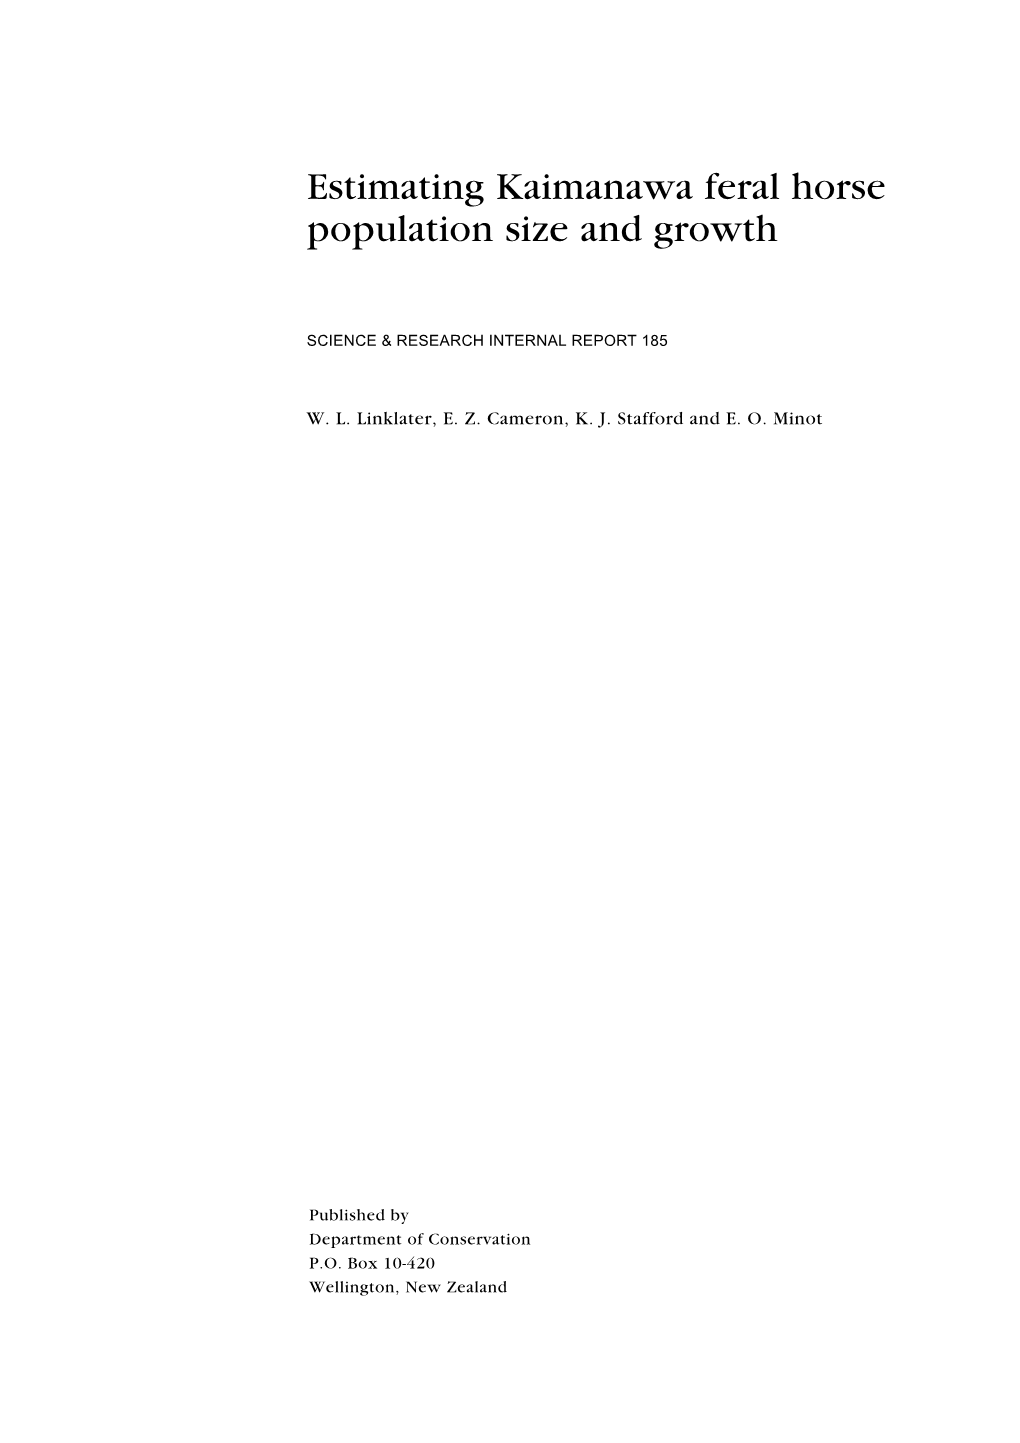 Estimating Kaimanawa Feral Horse Population Size and Growth